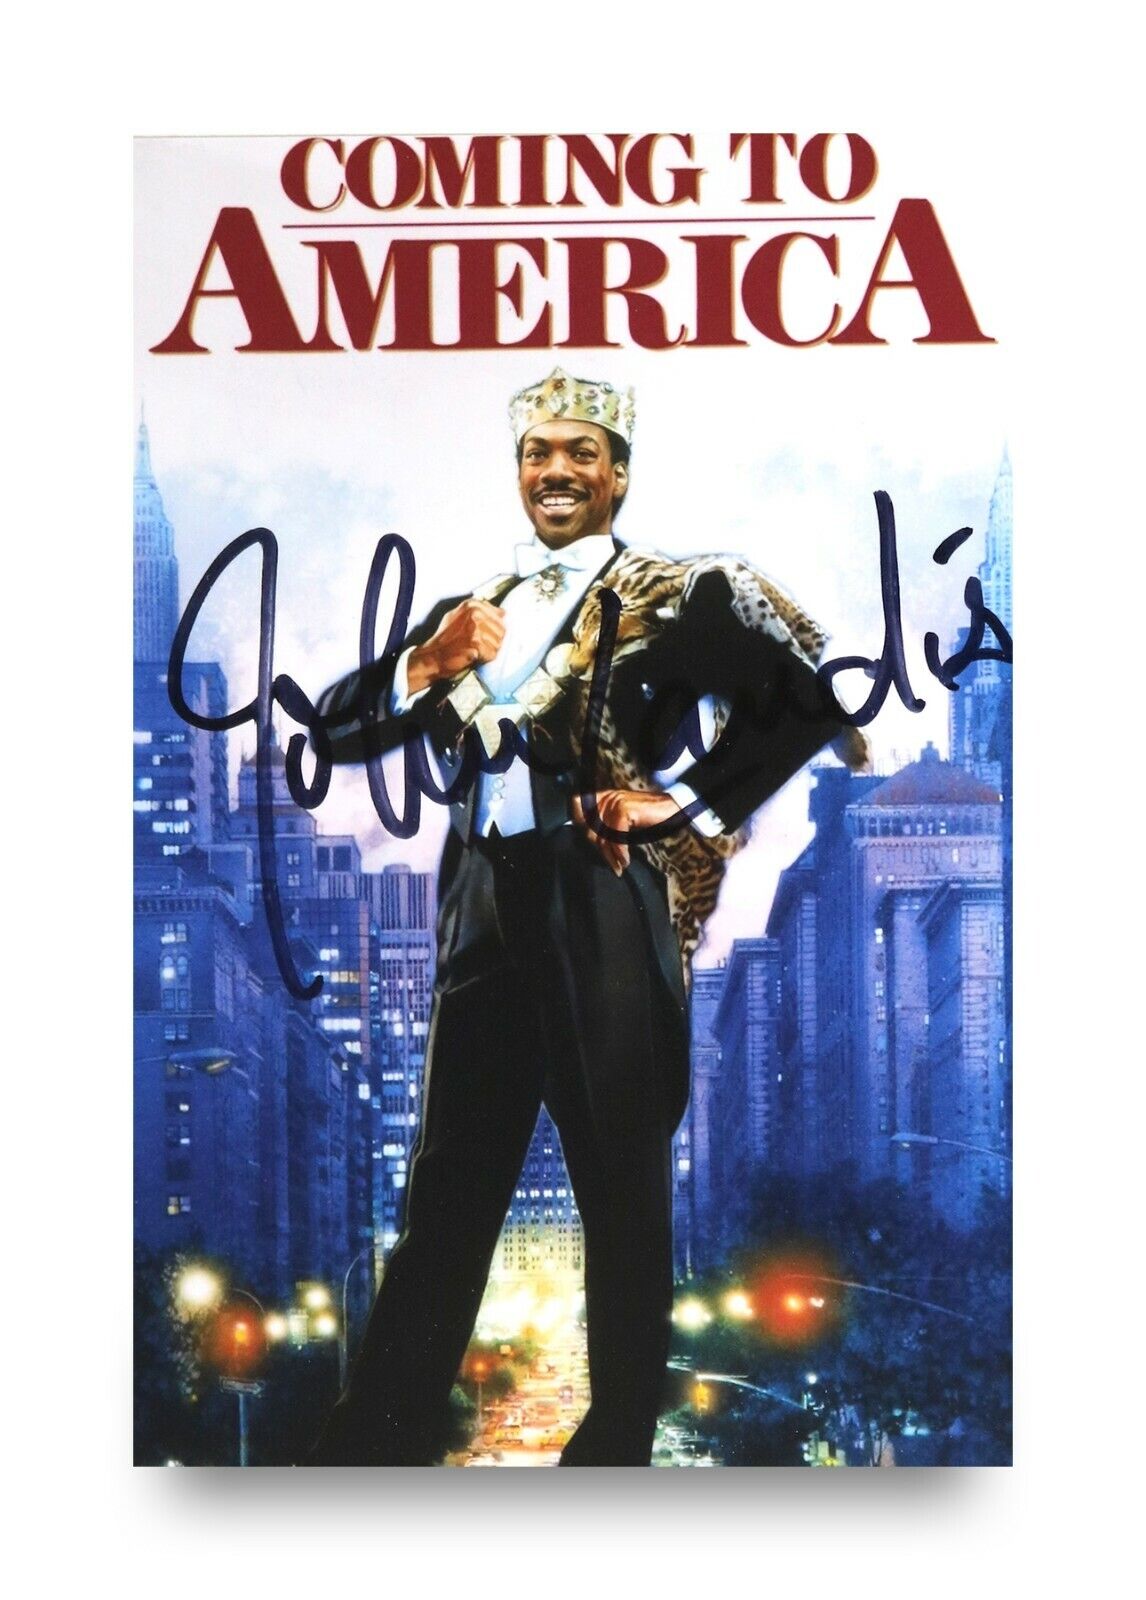 John Landis Signed 6x4 Photo Poster painting Coming To America The Blues Brothers Autograph +COA